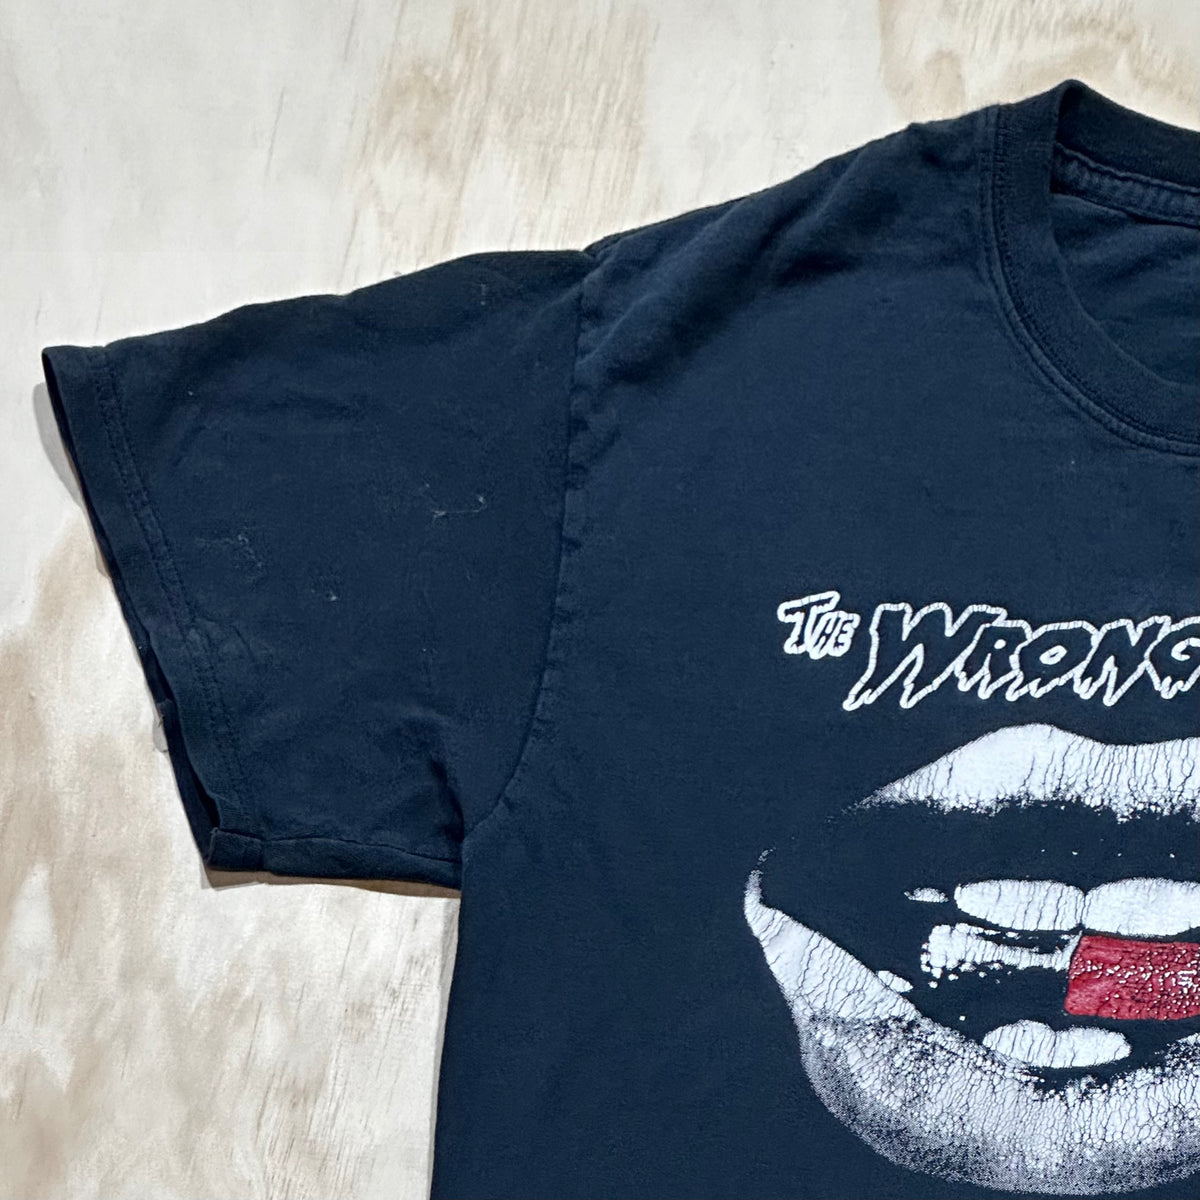 Vintage The Wrong Ones Deceiver t-shirt